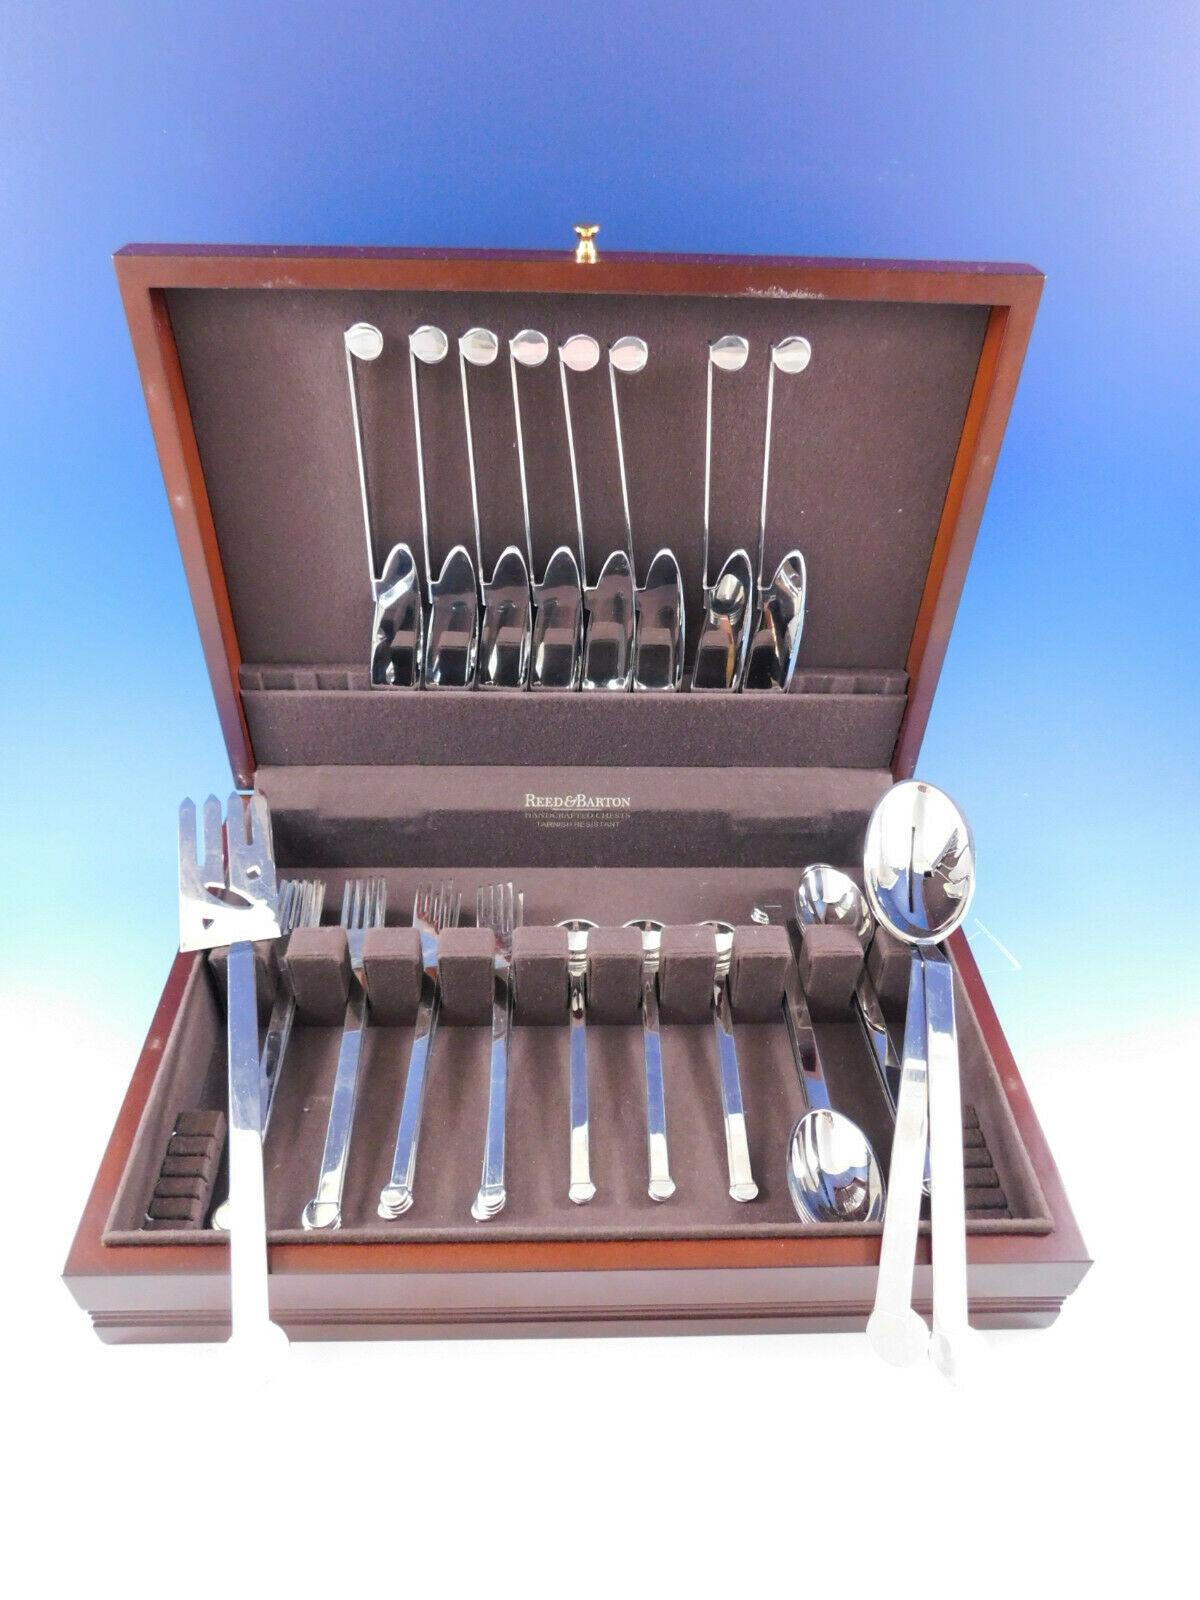 Extremely rare Bissell and Wilhite (Japan) modern design stainless steel flatware. With its modern lines and geometric handles, this stainless steel flatware pattern is a fabulous contemporary addition to your modern décor.
Crafted of 18/10